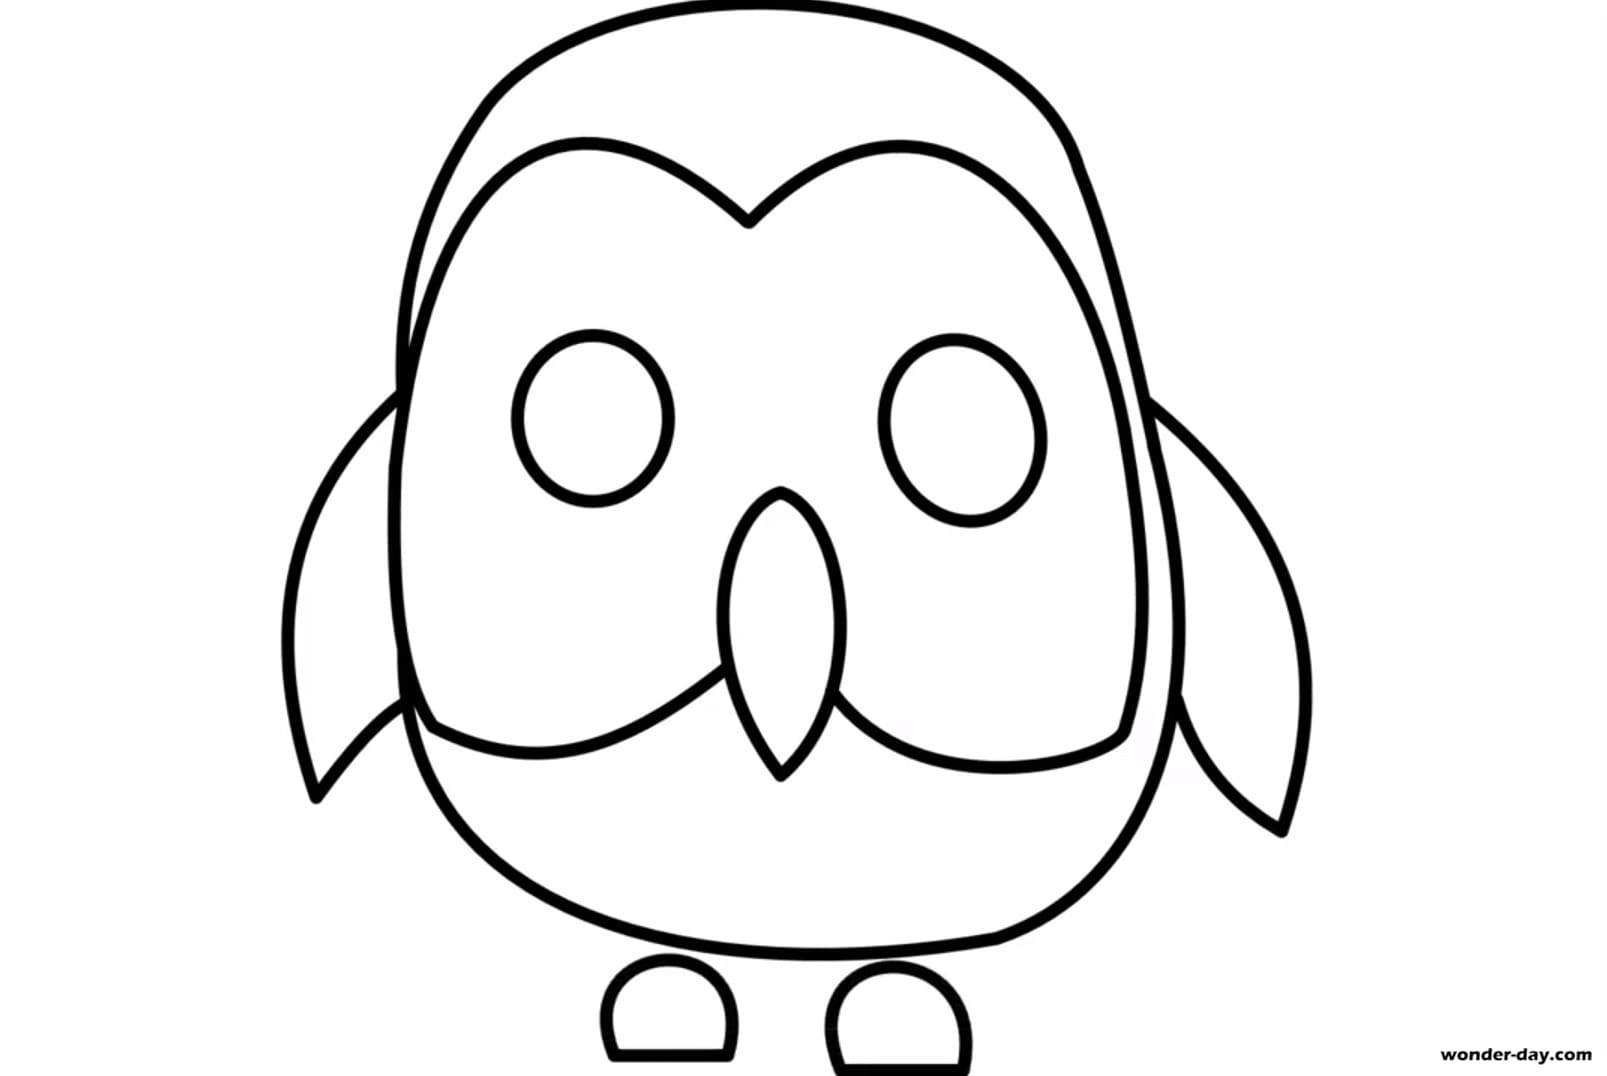 Coloring Pages Adopt Me Print For Free Wonder Day Com - owl roblox adopt me